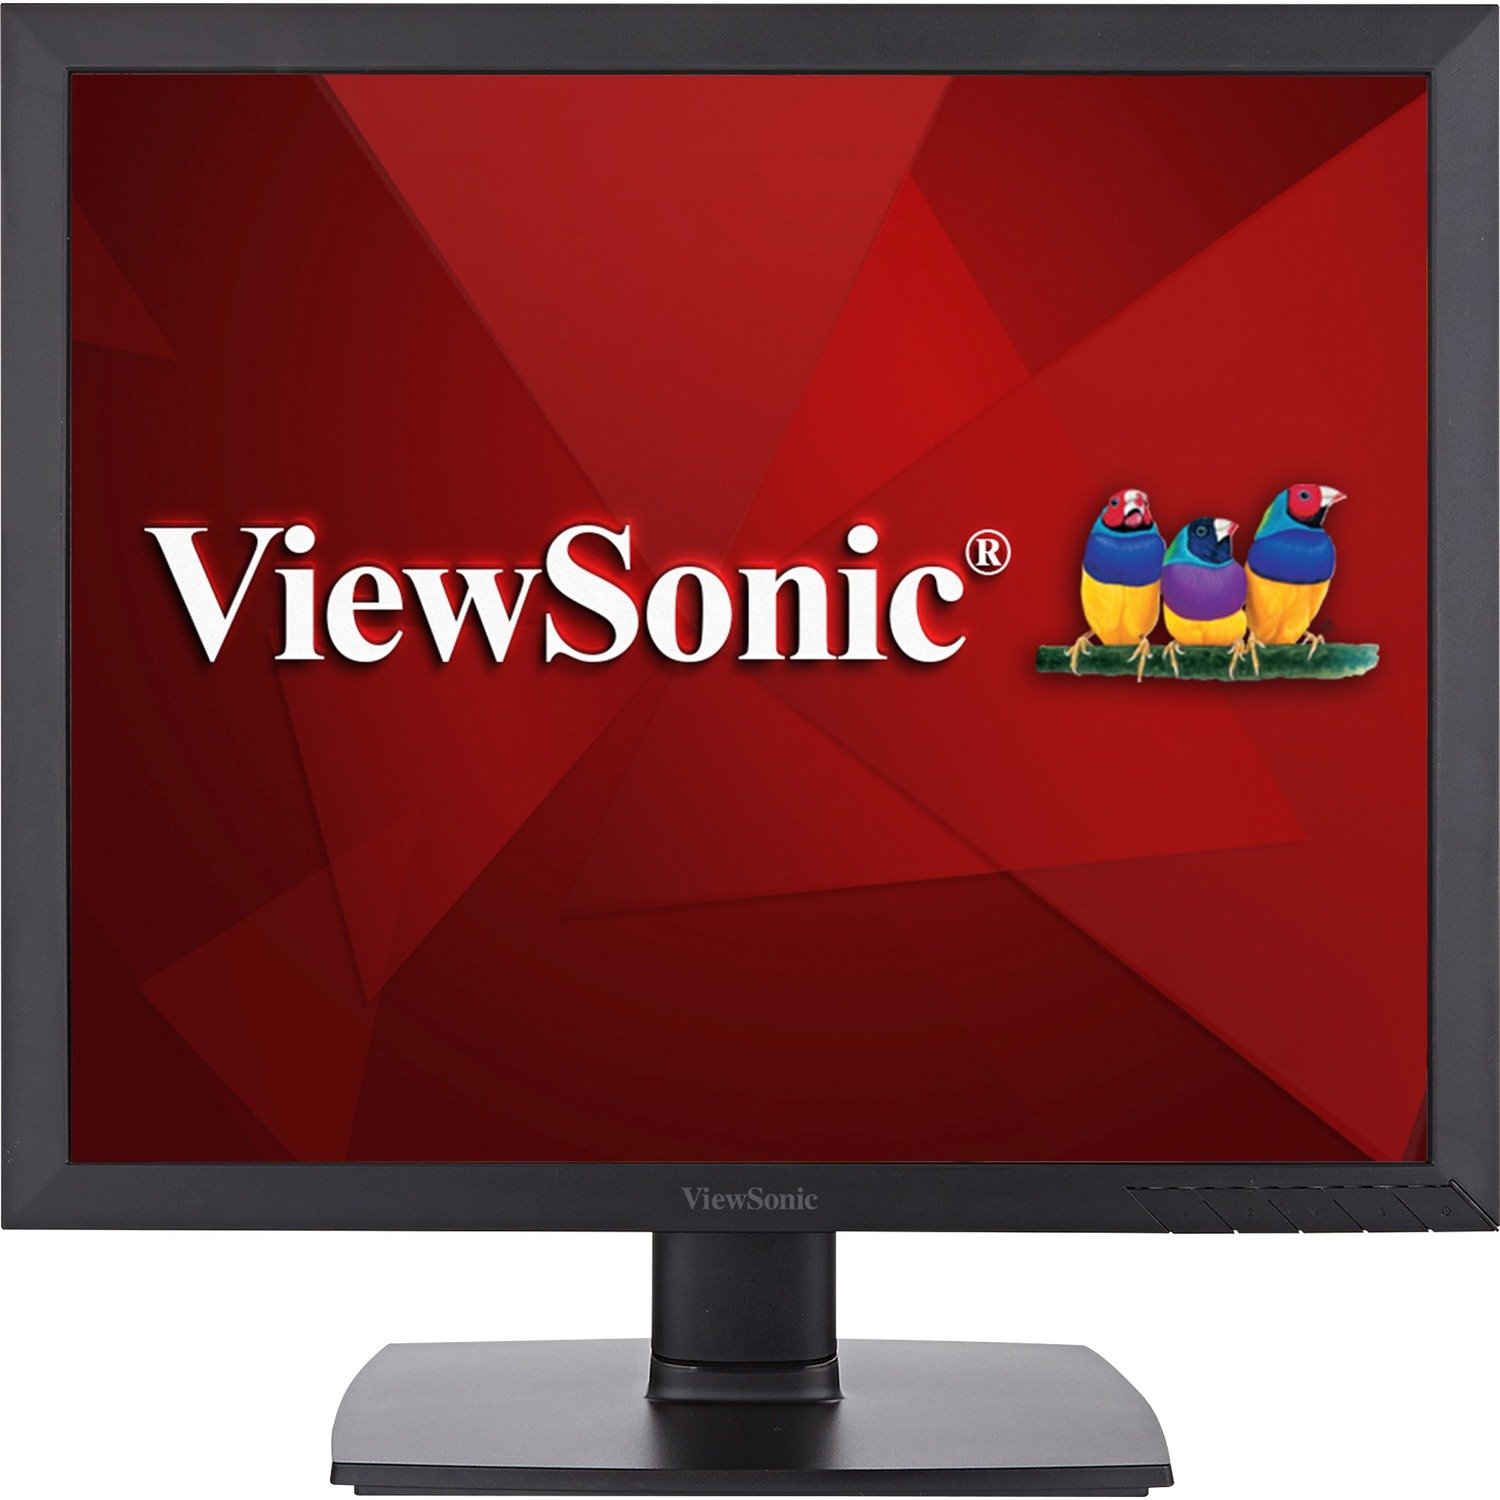 ViewSonic VA951S 19 " 1024p IPS Monitor with Enhanced Viewing Comfort, HDMI and DVI